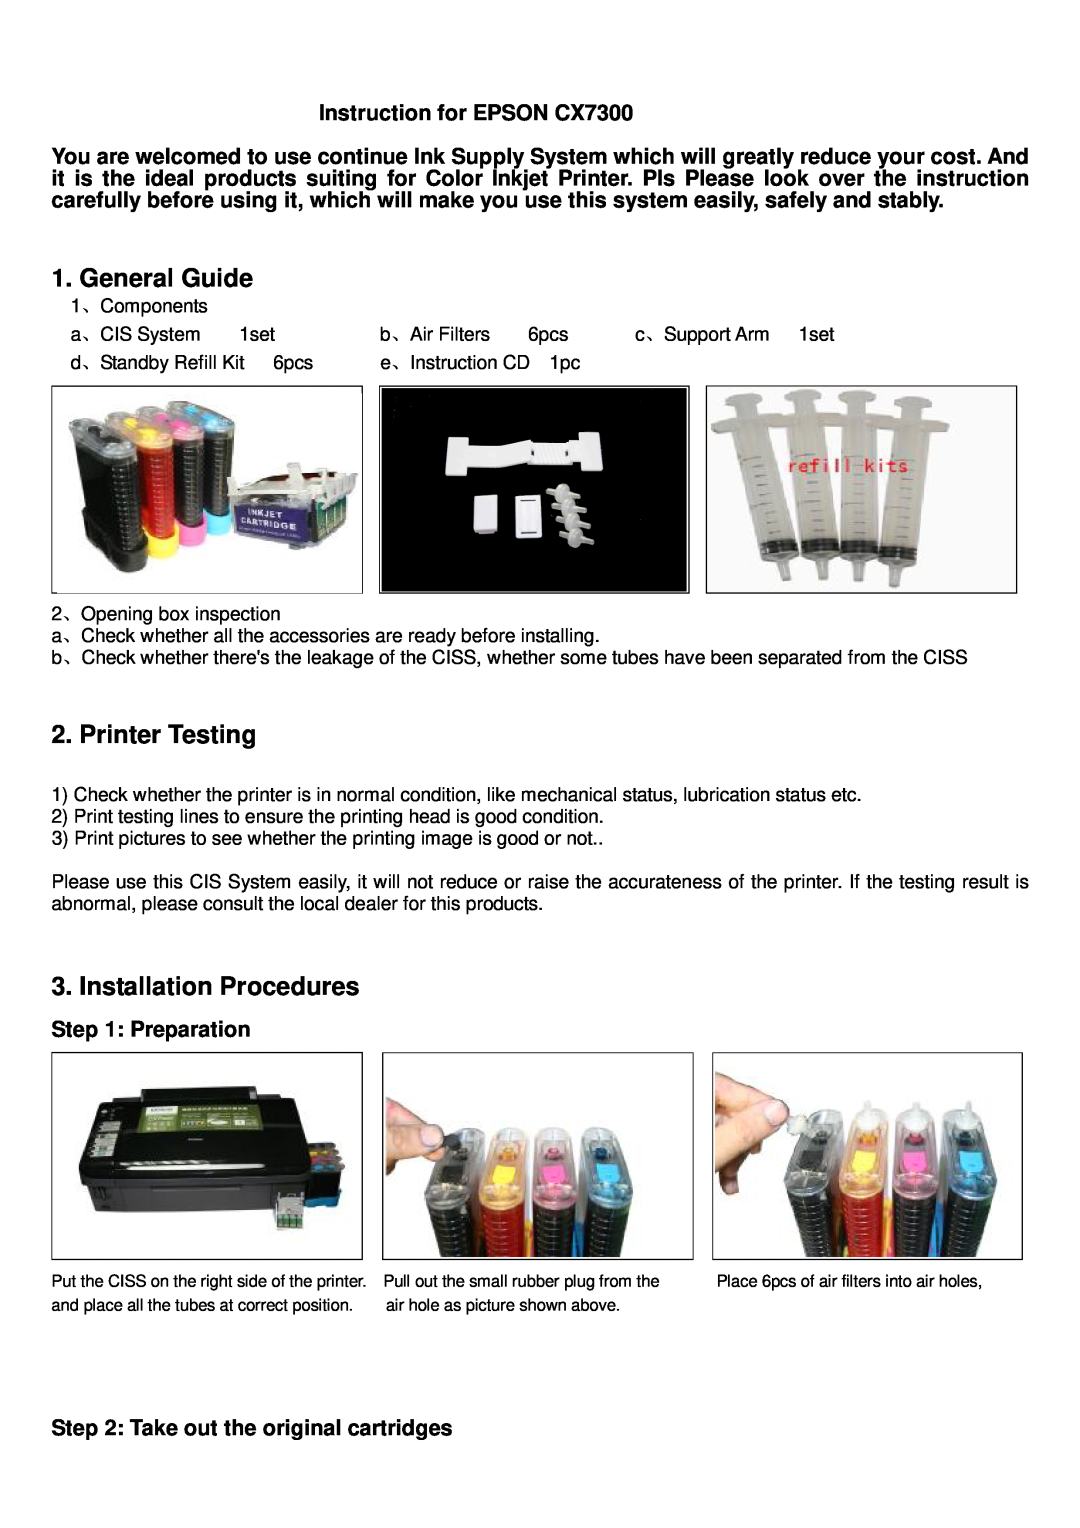 Epson manual General Guide, Printer Testing, Installation Procedures, Instruction for EPSON CX7300, Preparation 